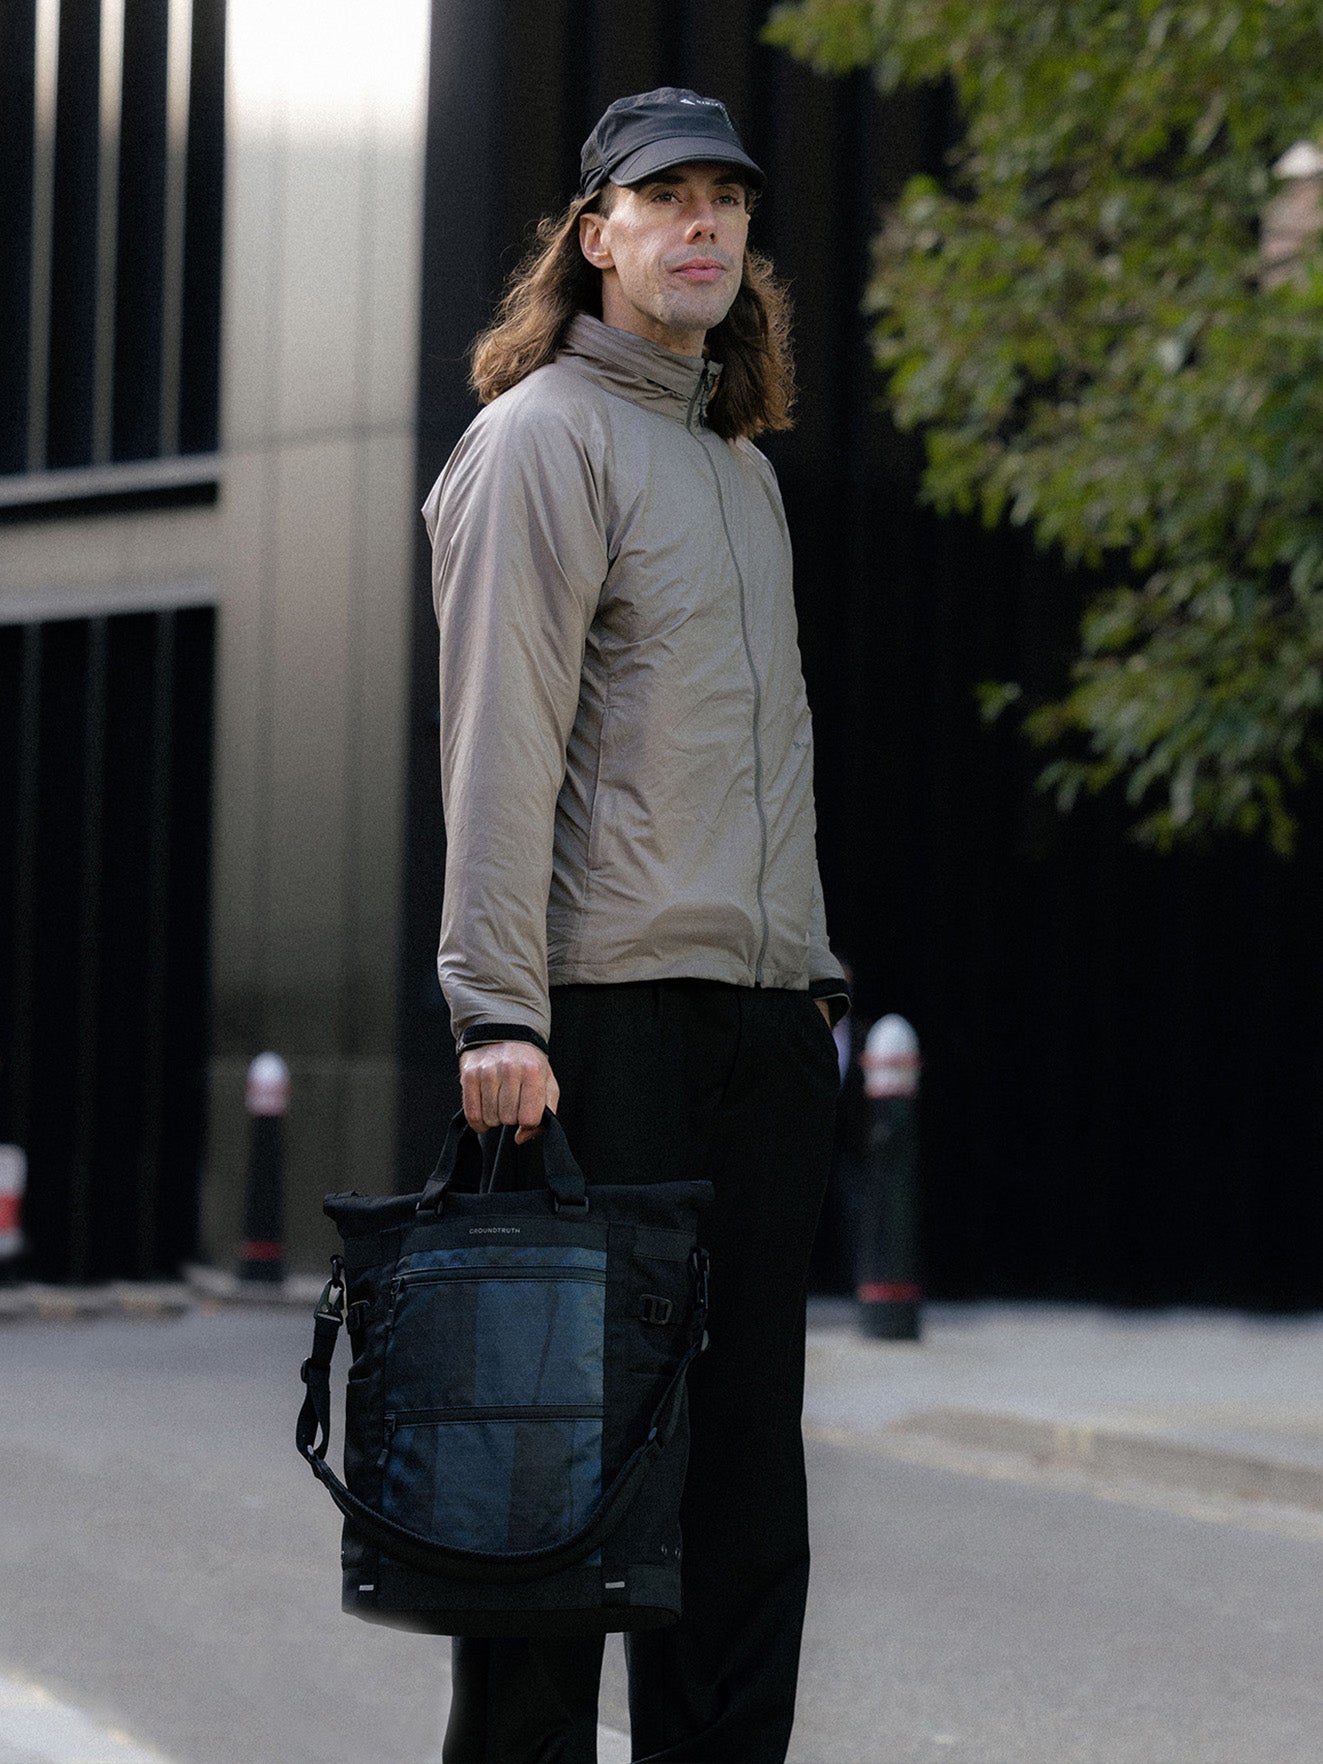 The Weatherproof 17L Technical Tote.